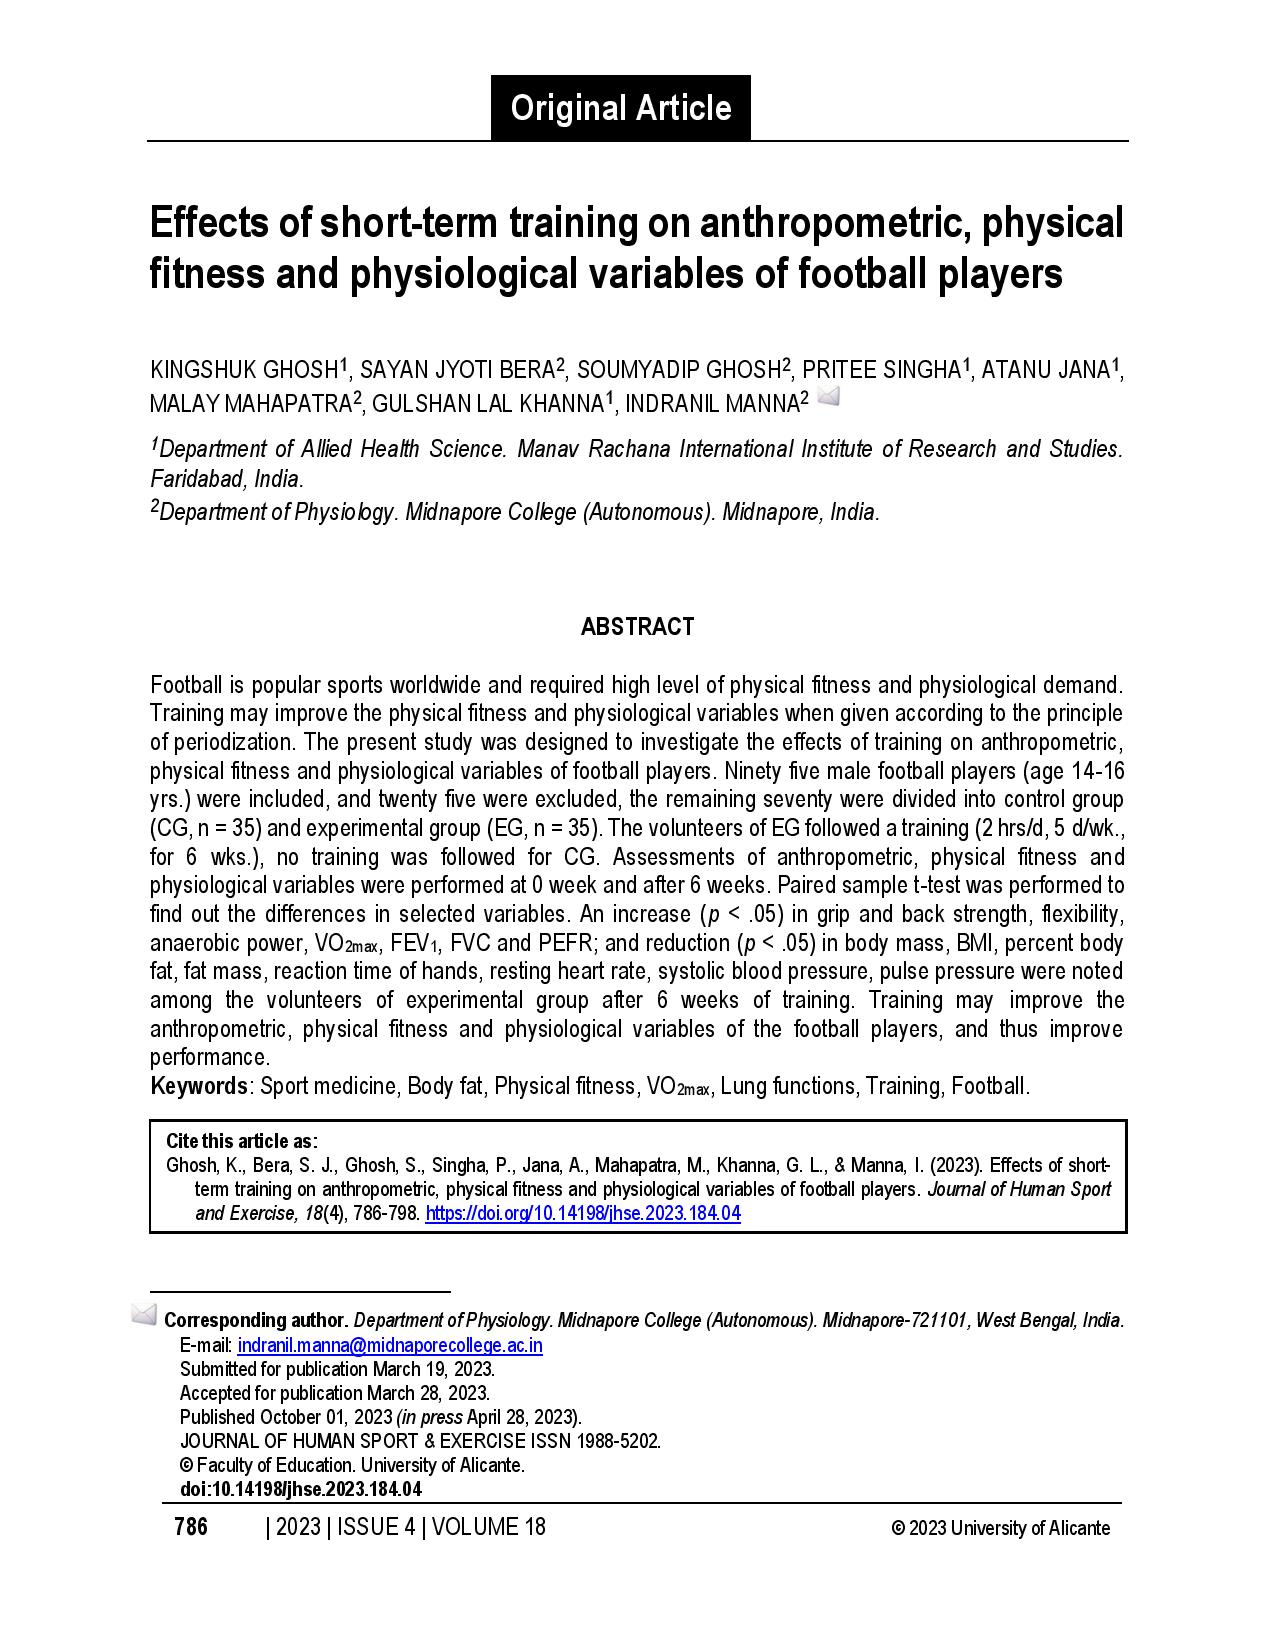 Effects of short-term training on anthropometric, physical fitness and physiological variables of football players P